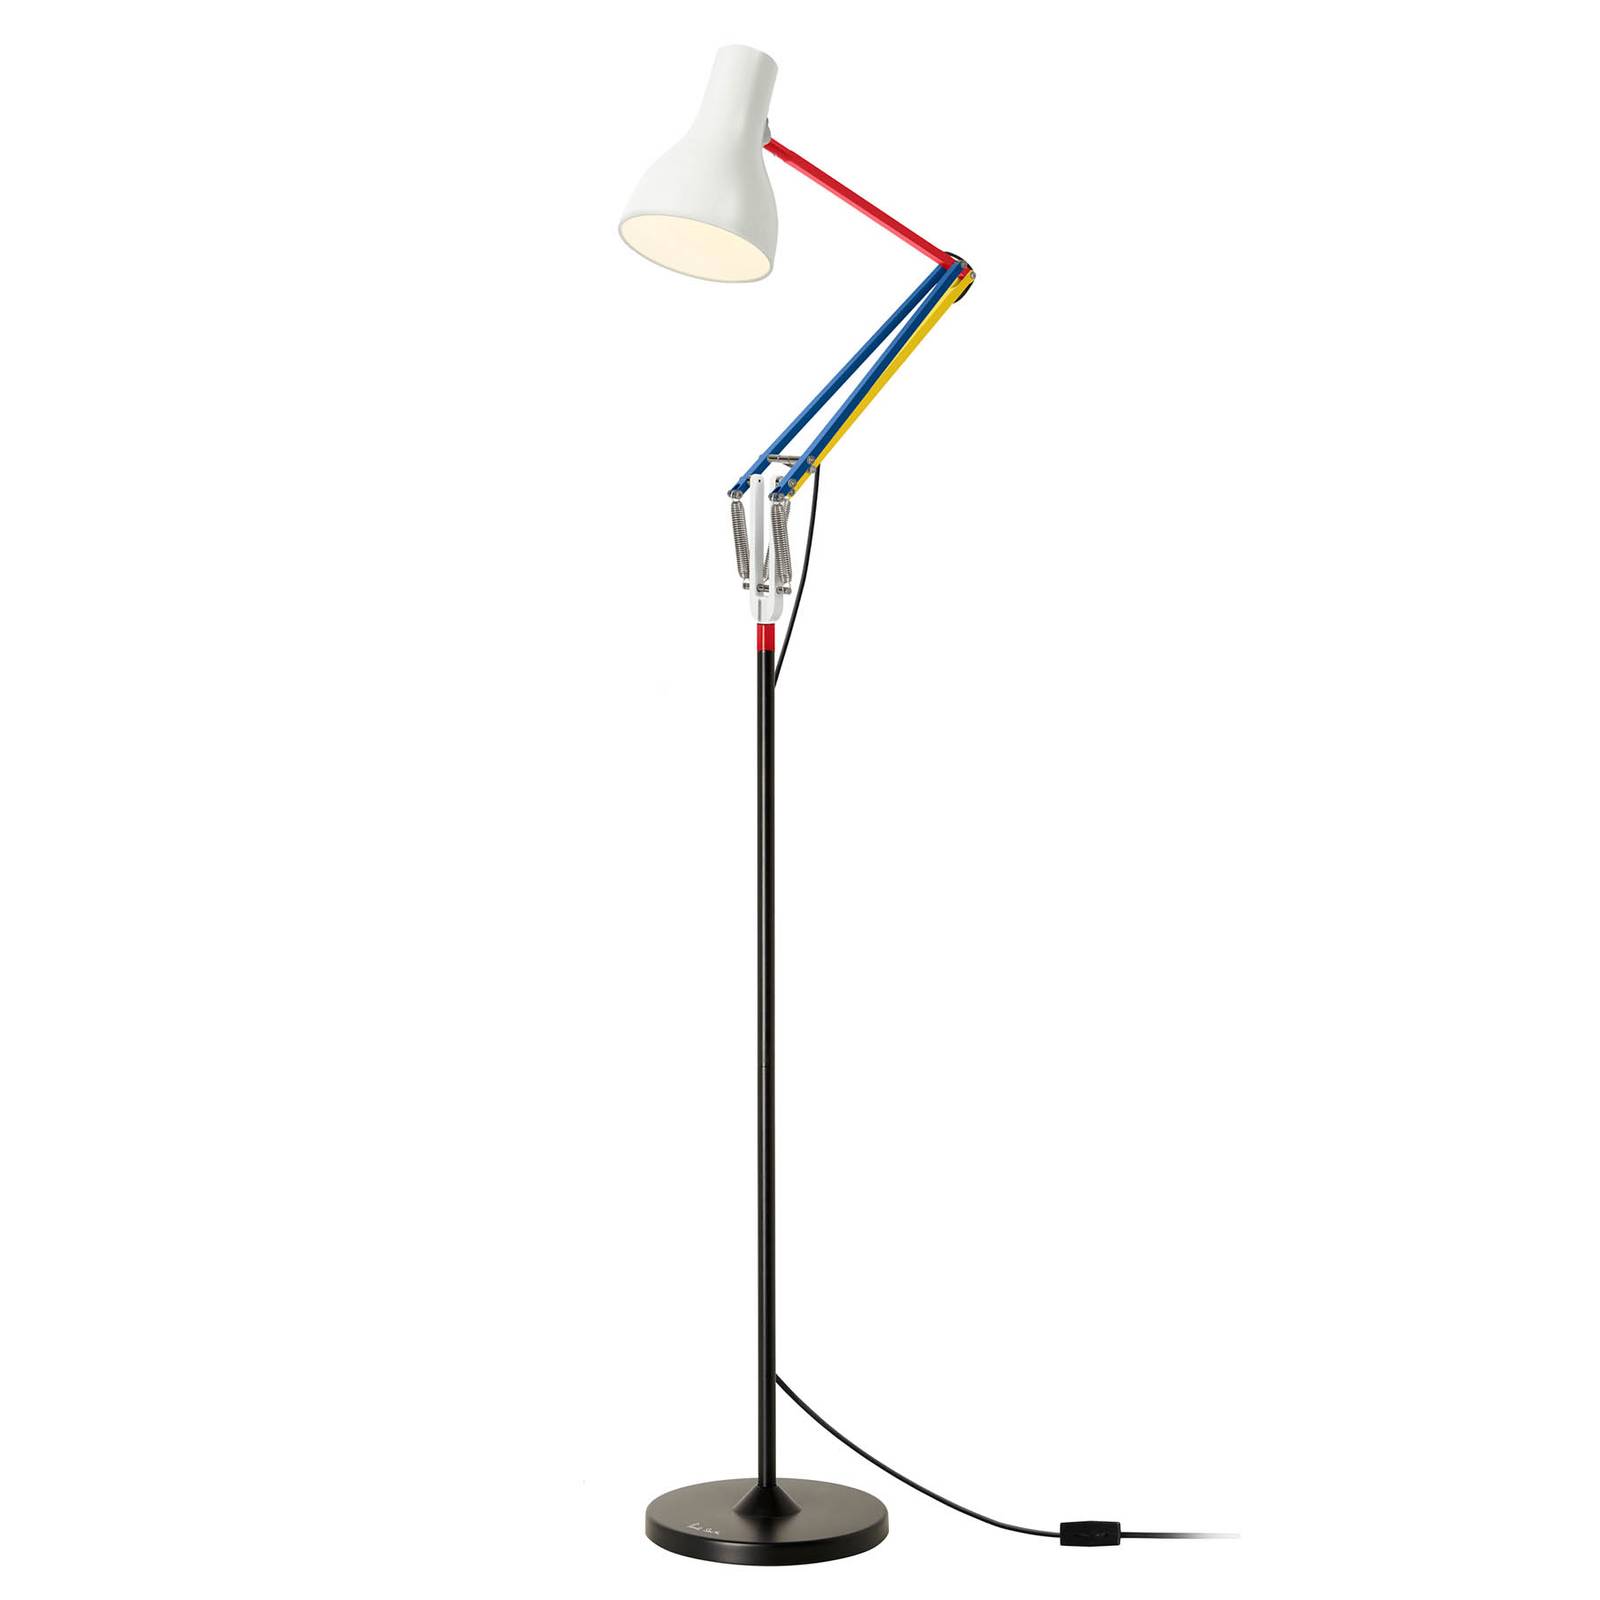 Anglepoise Type 75 Stehlampe Paul Smith Edition 3 von Anglepoise